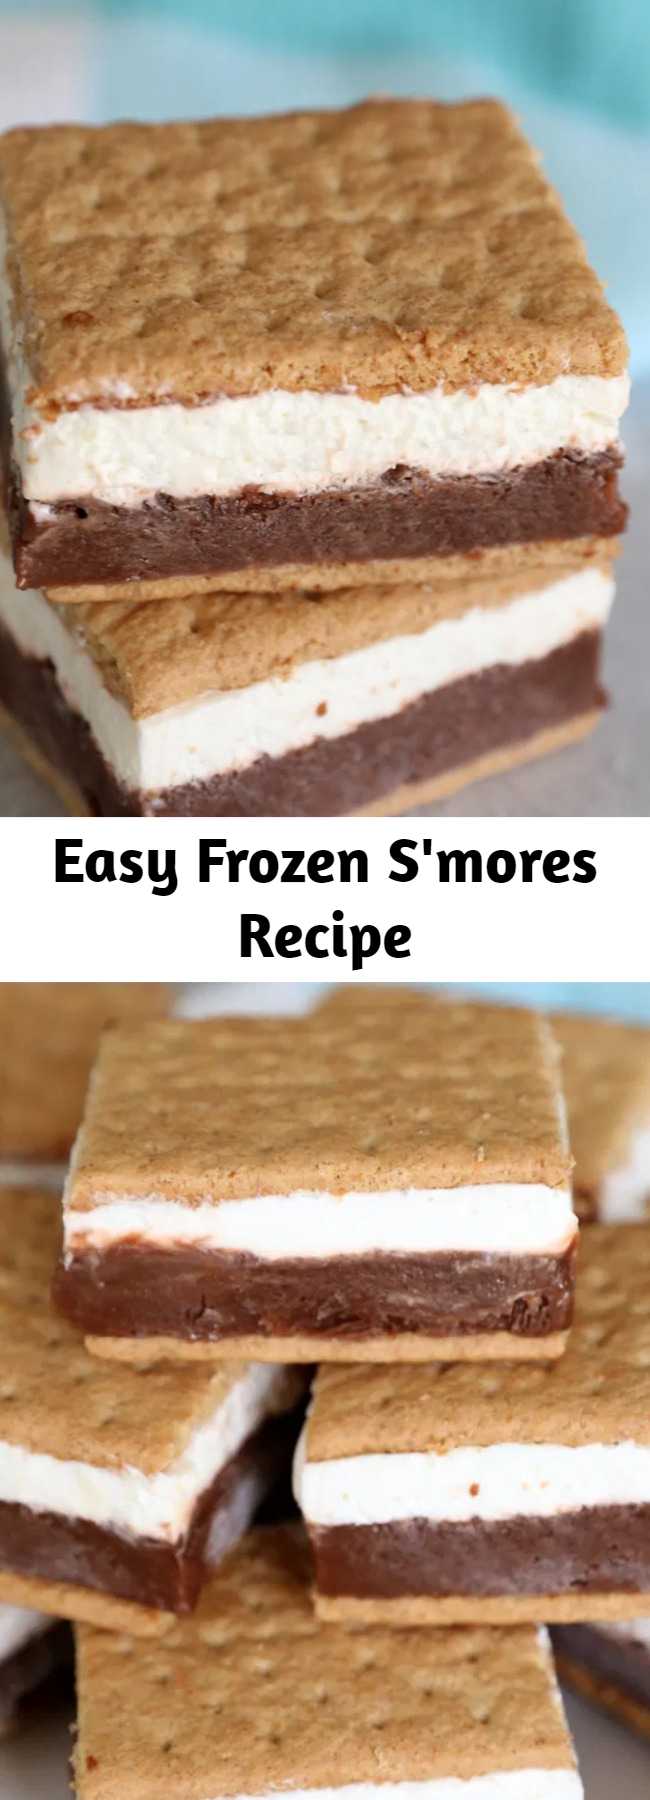 Easy Frozen S'mores Recipe - Layers of chocolate pudding and marshmallow creme make these frozen s'mores the best way to enjoy a s'more on a hot summer day! #smores